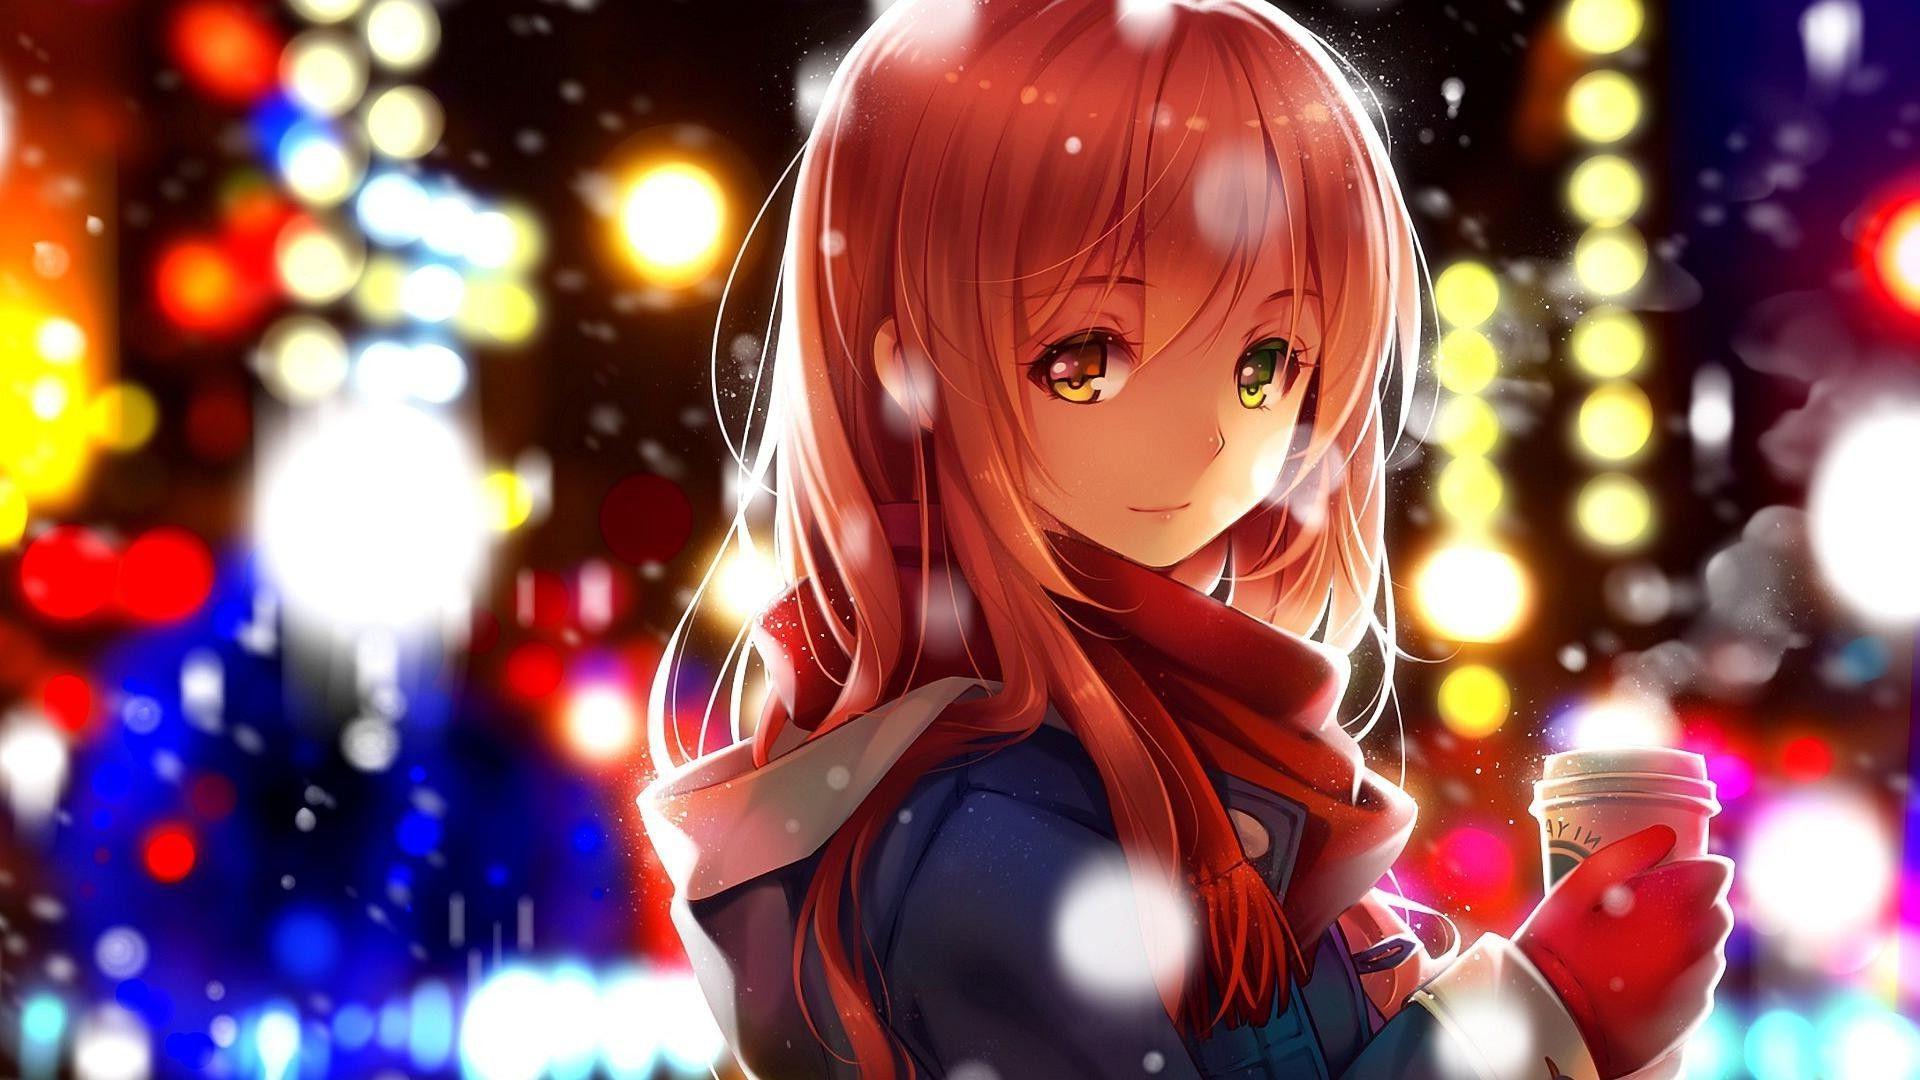 1920x1080 Anime Girl Wallpapers - Wallpaper Cave